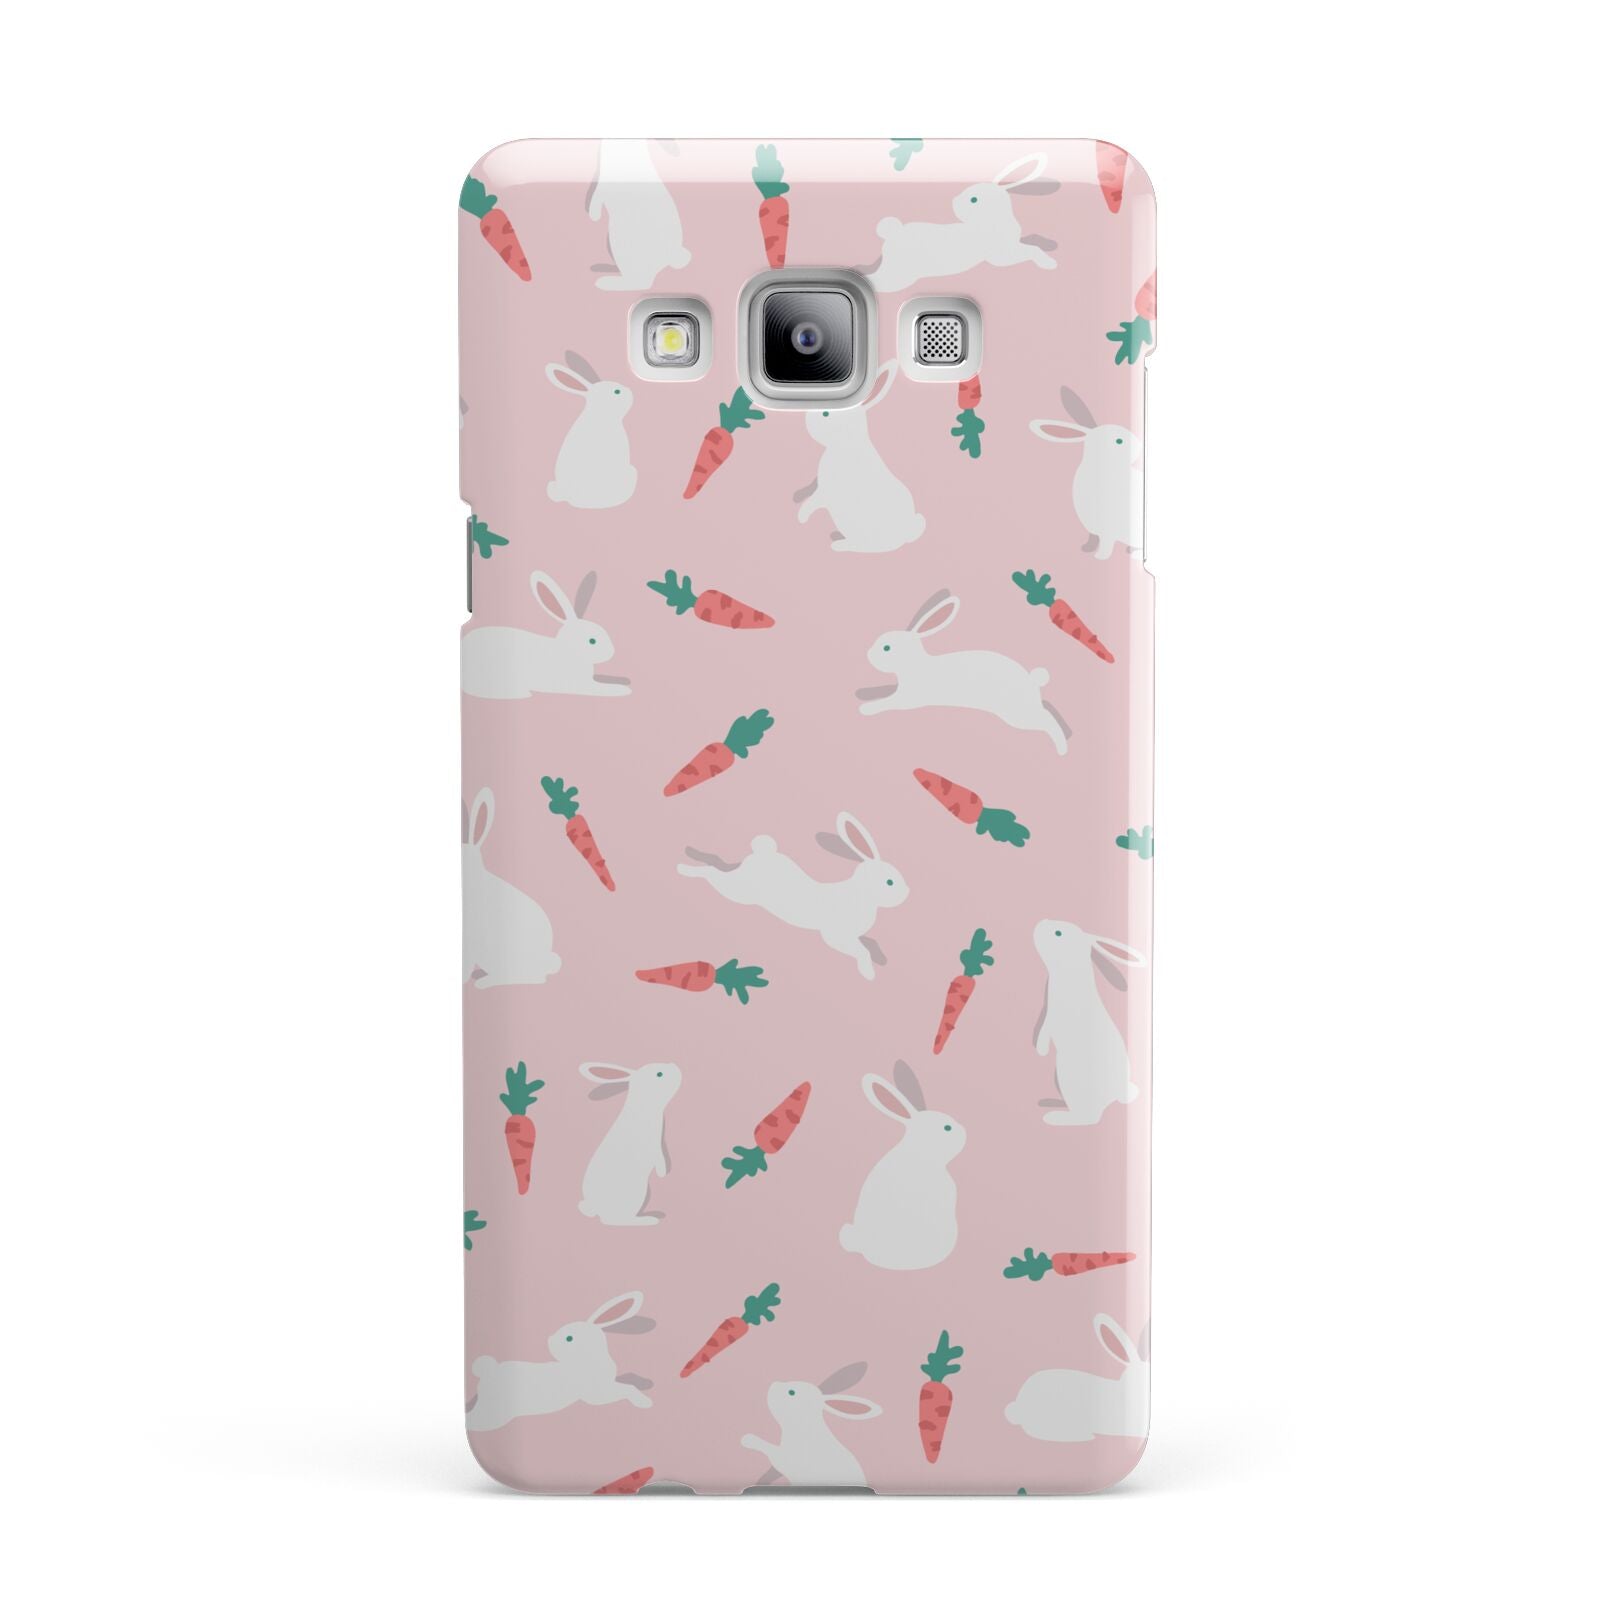 Easter Bunny And Carrot Samsung Galaxy A7 2015 Case